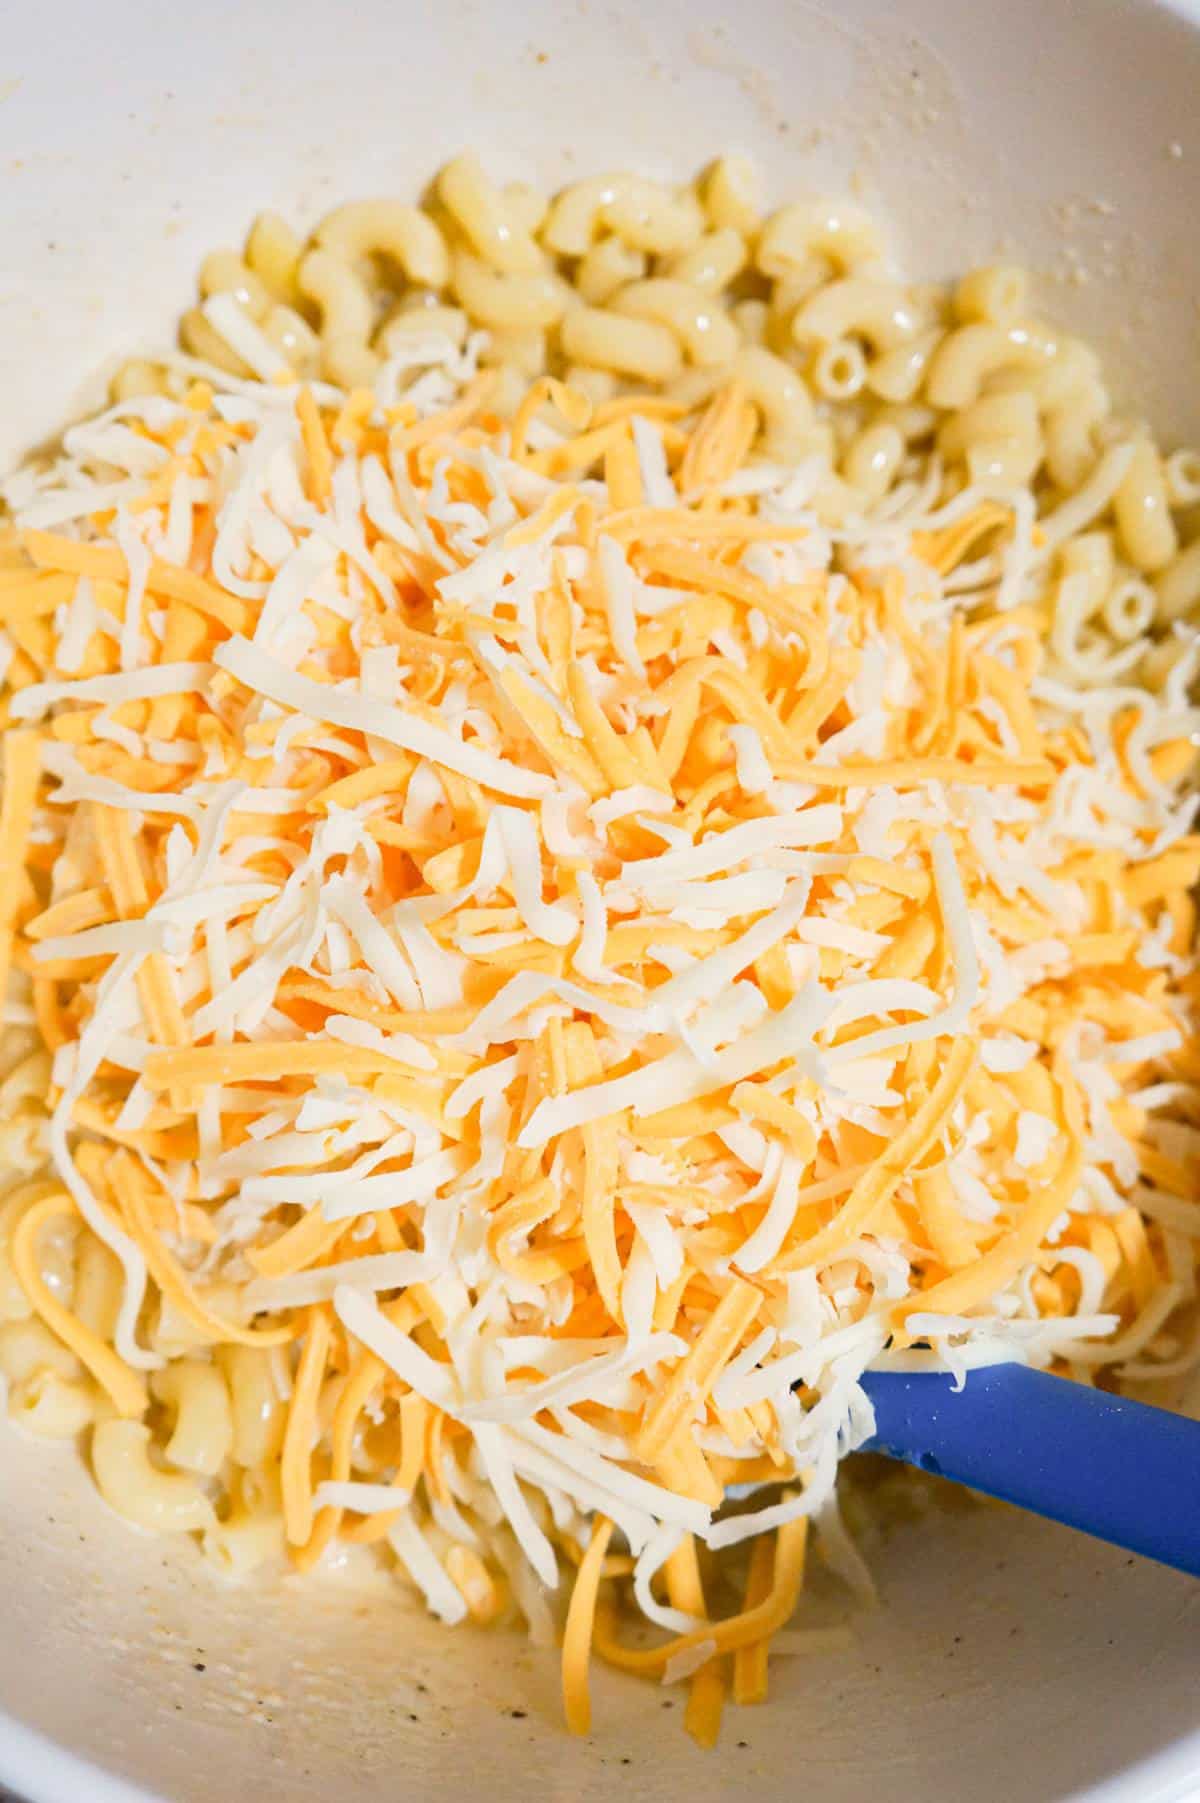 shredded cheese on top of macaroni in a mixing bowl